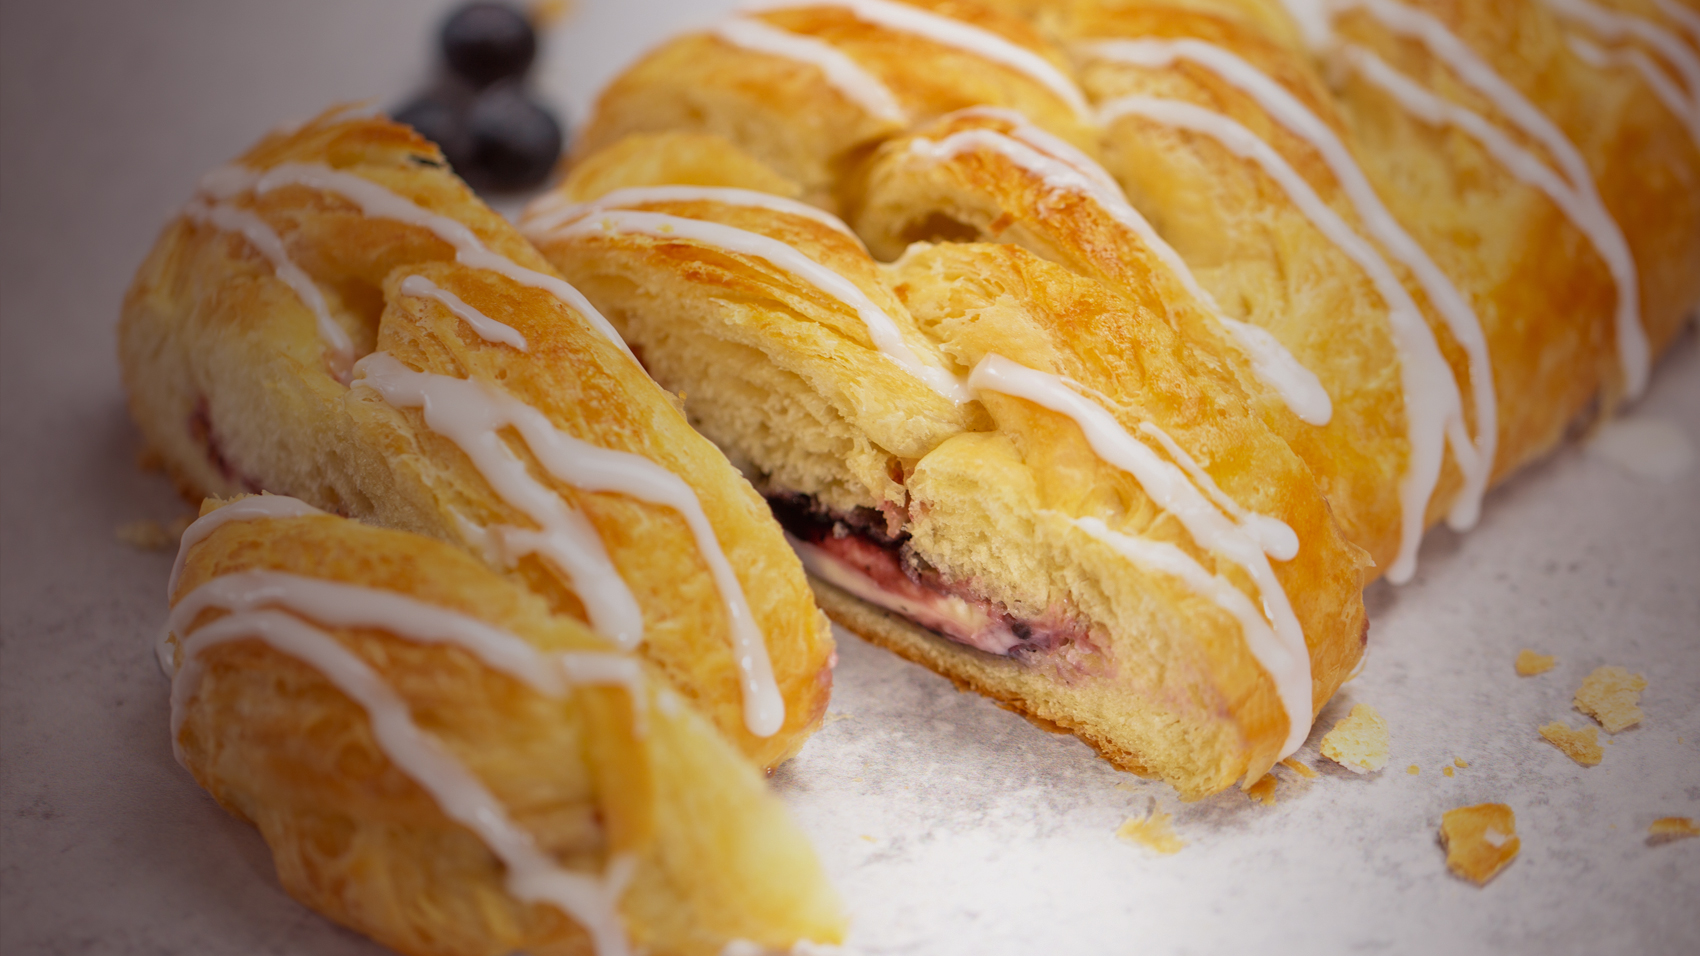 Blueberry & Cream Cheese Butter Braid Pastry